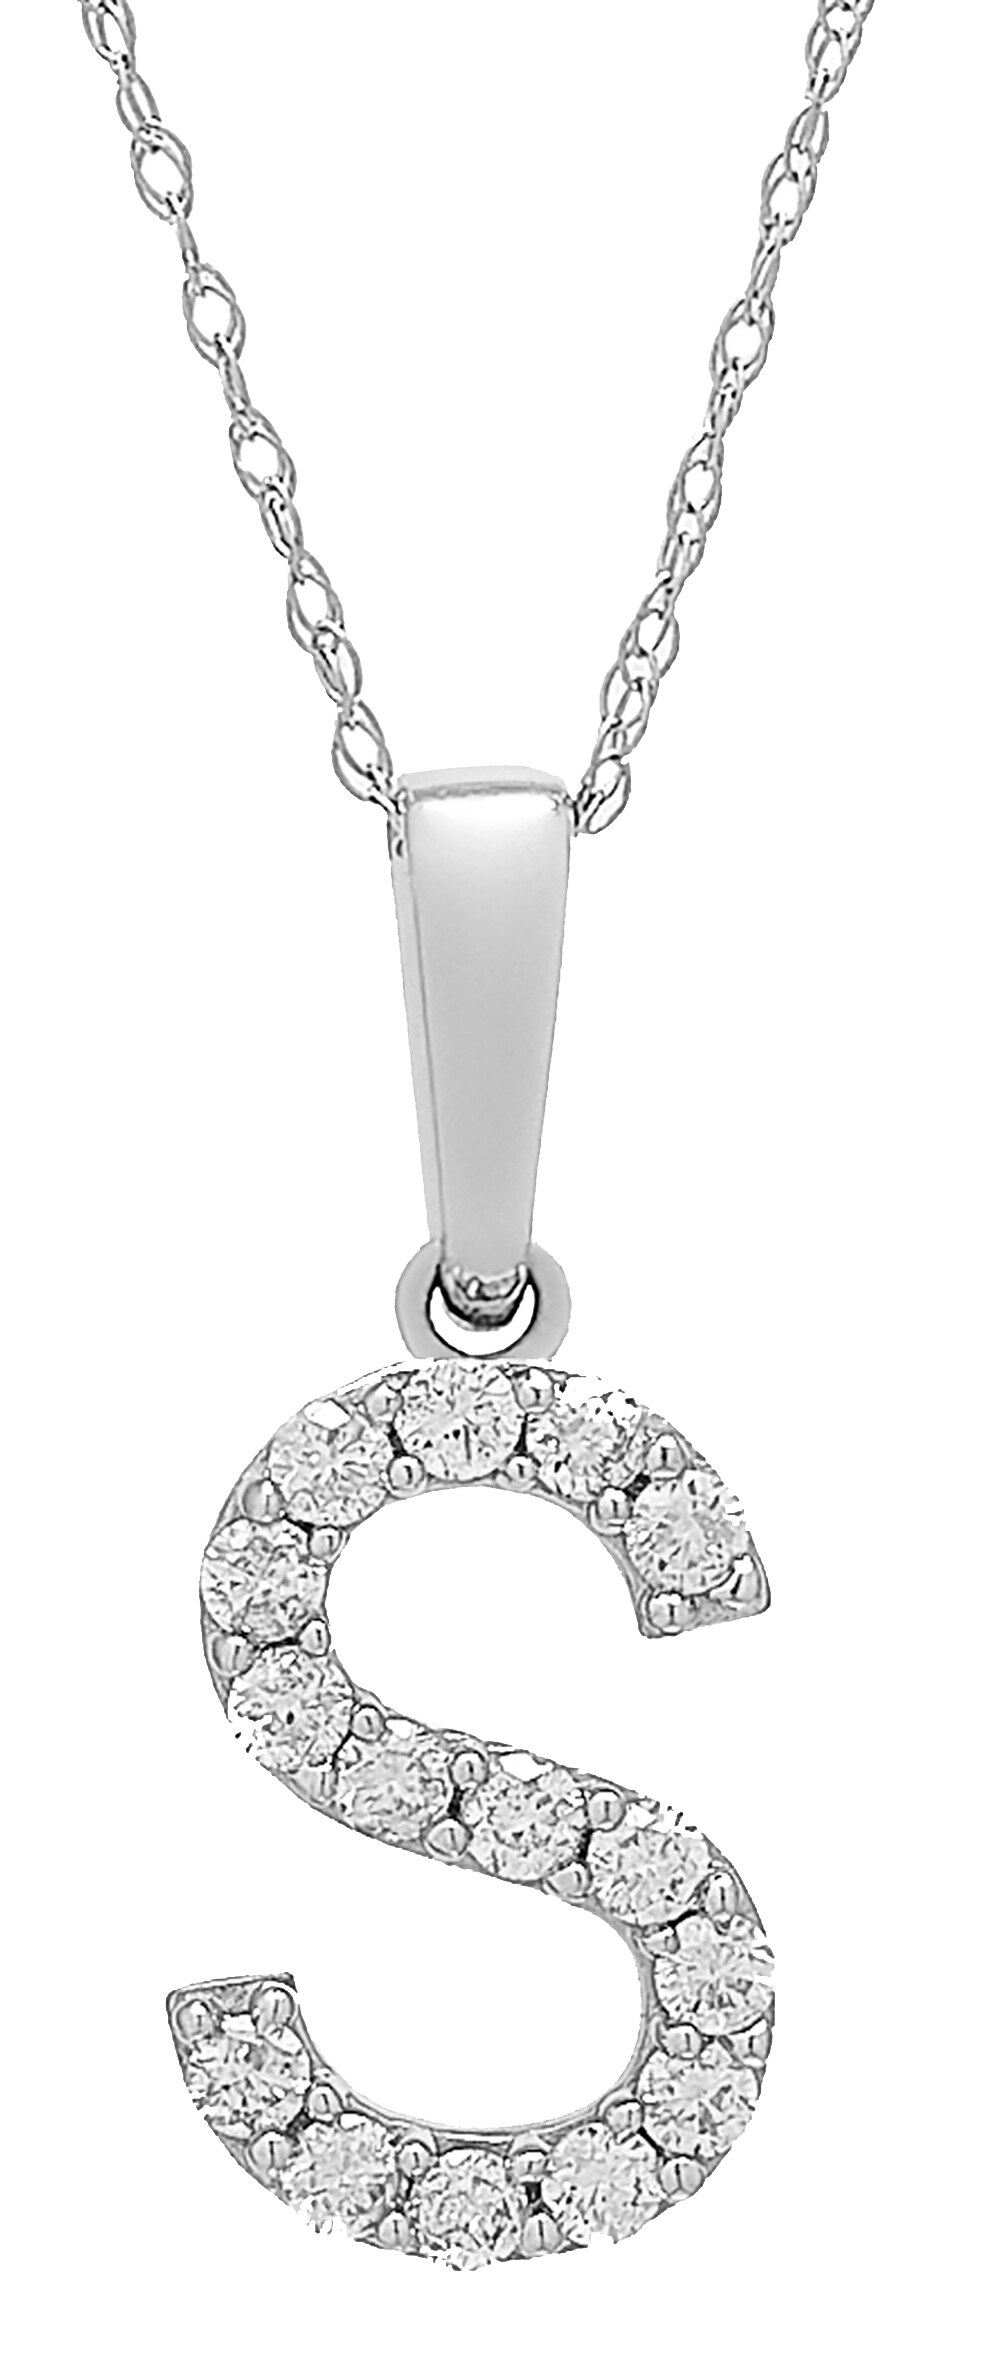 10k White Gold Letter "E" Initial Pendant Necklace with Diamonds 0.19ctw 